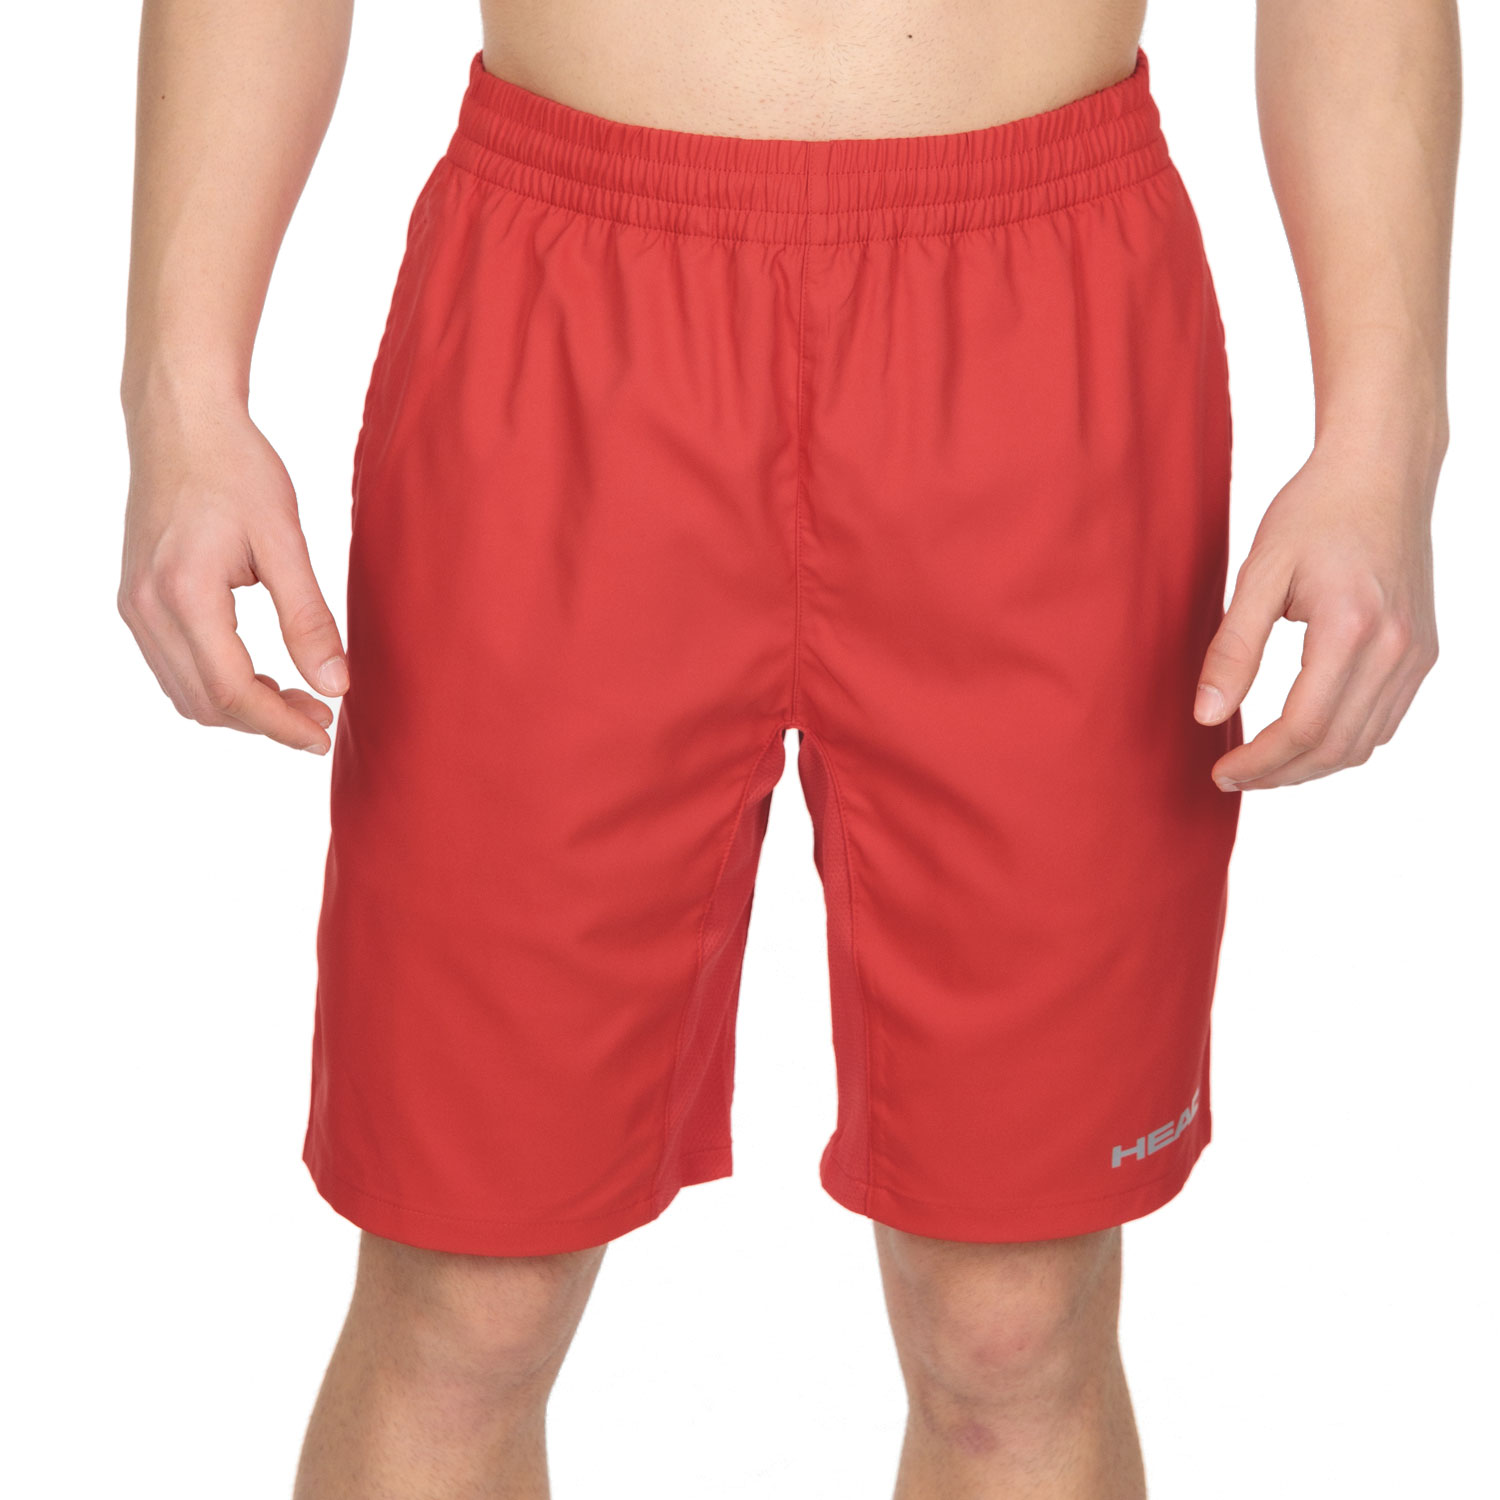 Head Club 10in Shorts - Red